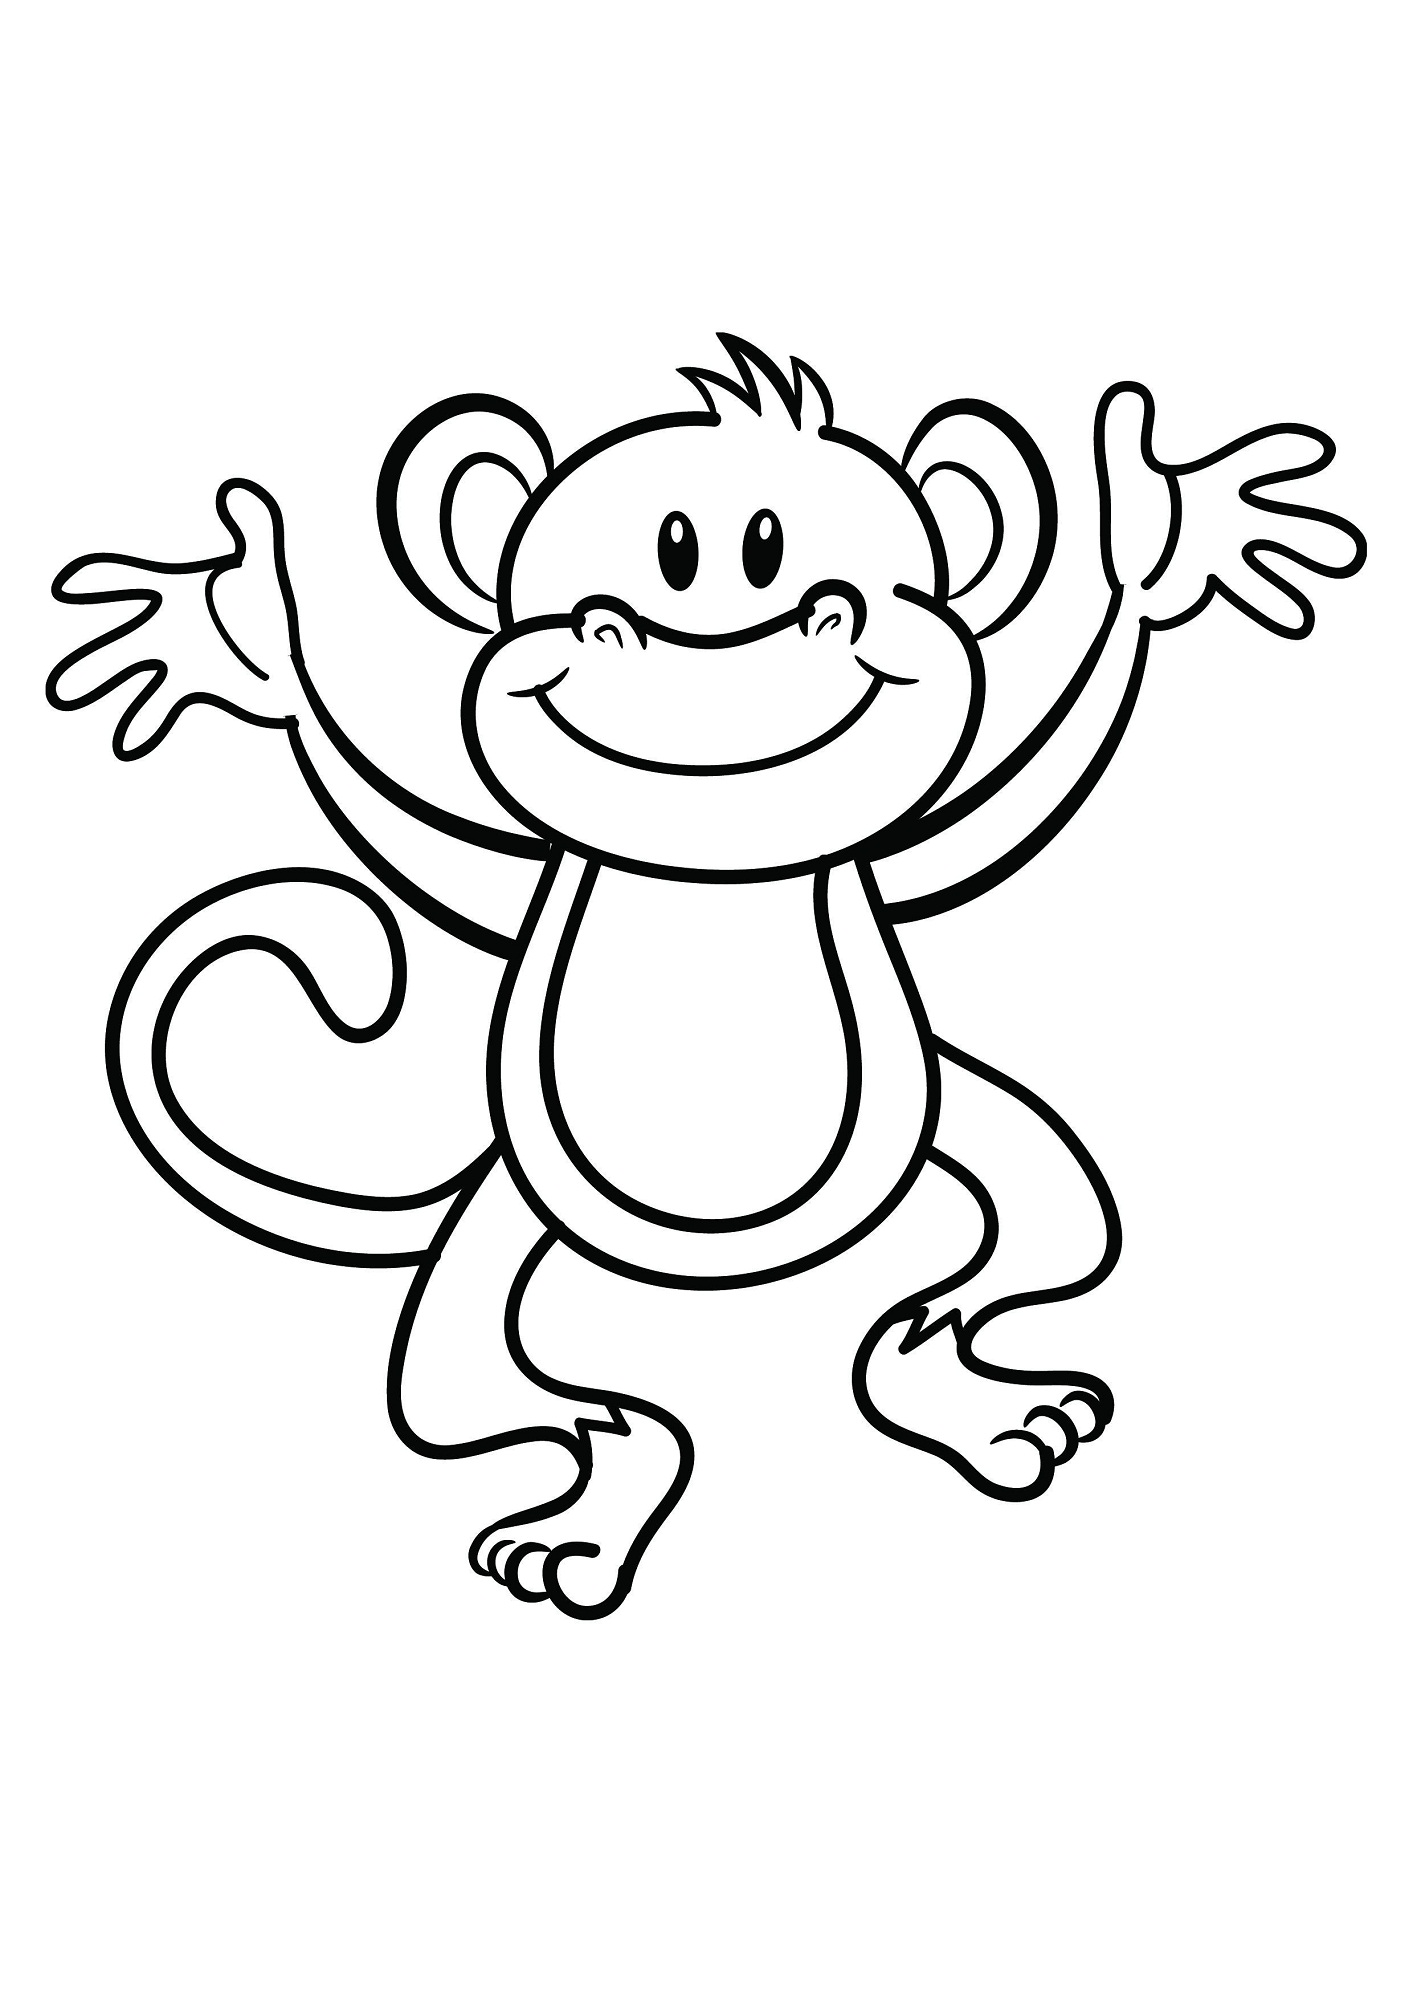 Printable Outline Of Monkey